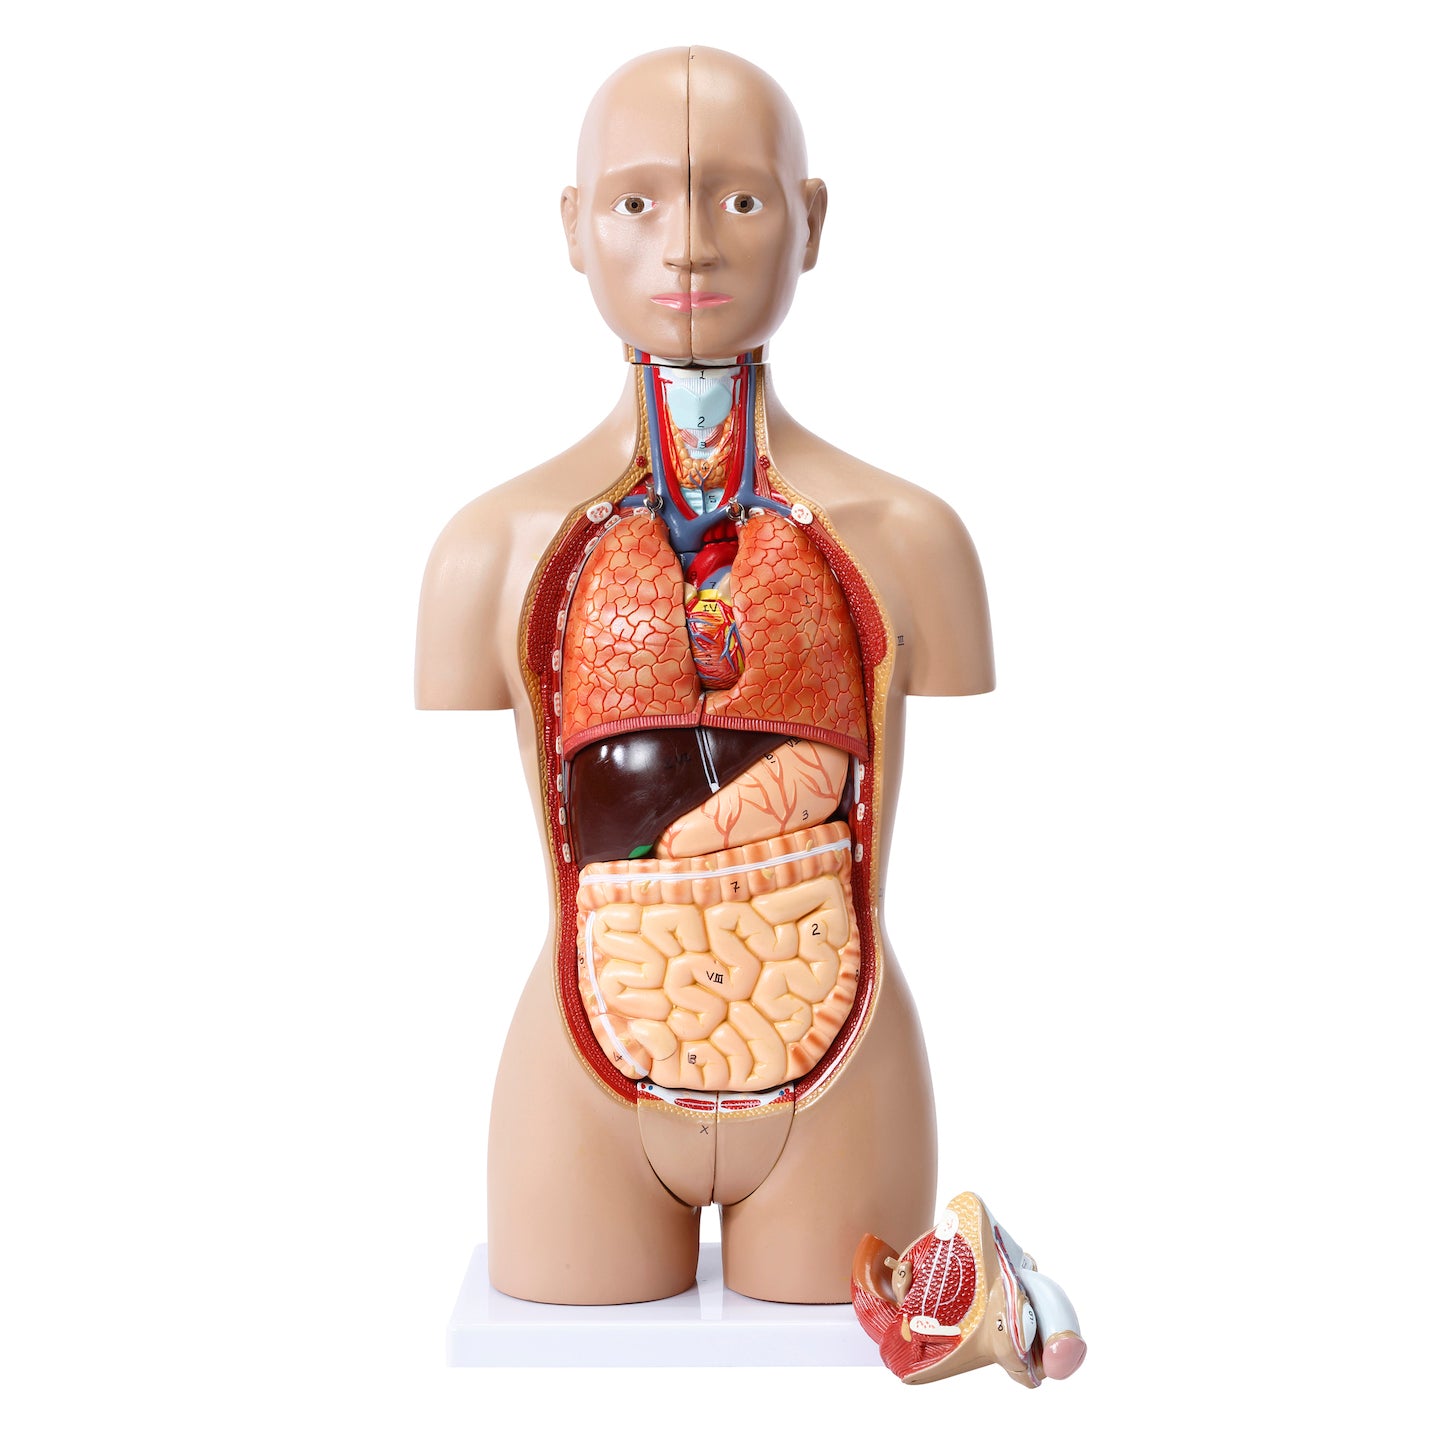 Highly detailed mini torso with 15 removable parts and male and female genitalia